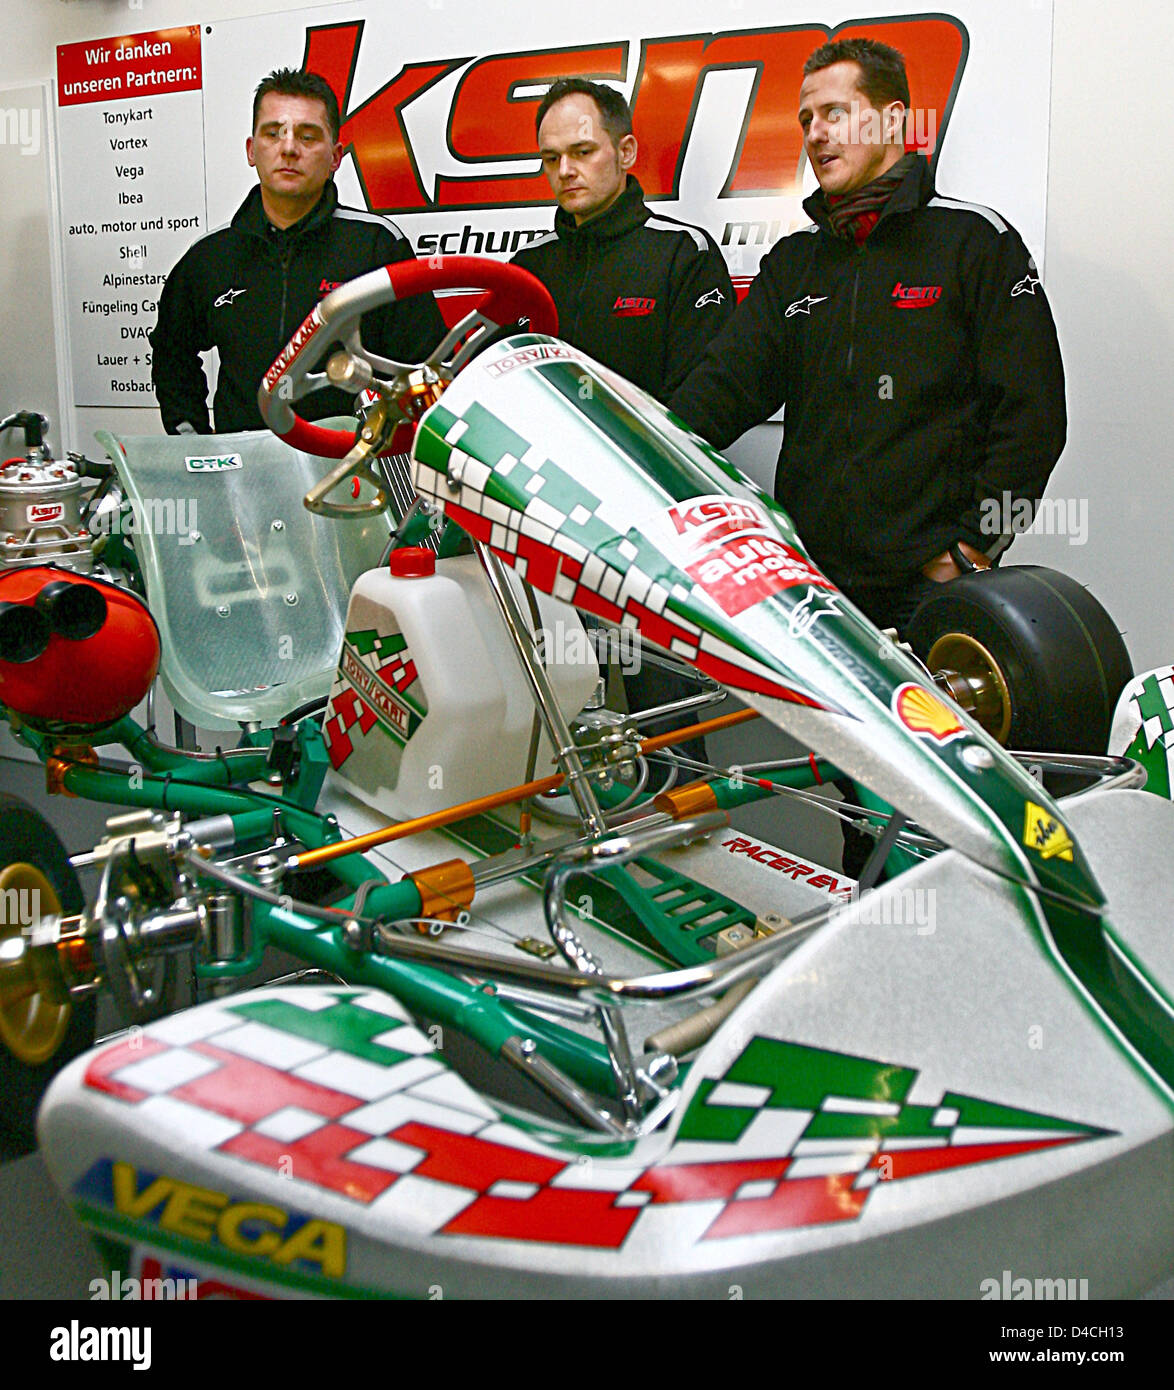 Peter Kaiser, Thomas Muchow and Michael Schuhmacher (L-R) pose behind a cart in Bergheim, Germany, 02 February 2008. The three men are the owners of restructured company 'KSM Motorsport'. The public was invited to visit the company premises today, on the official opening day 02 February. Photo: FREDRIK VON ERICHSEN Stock Photo